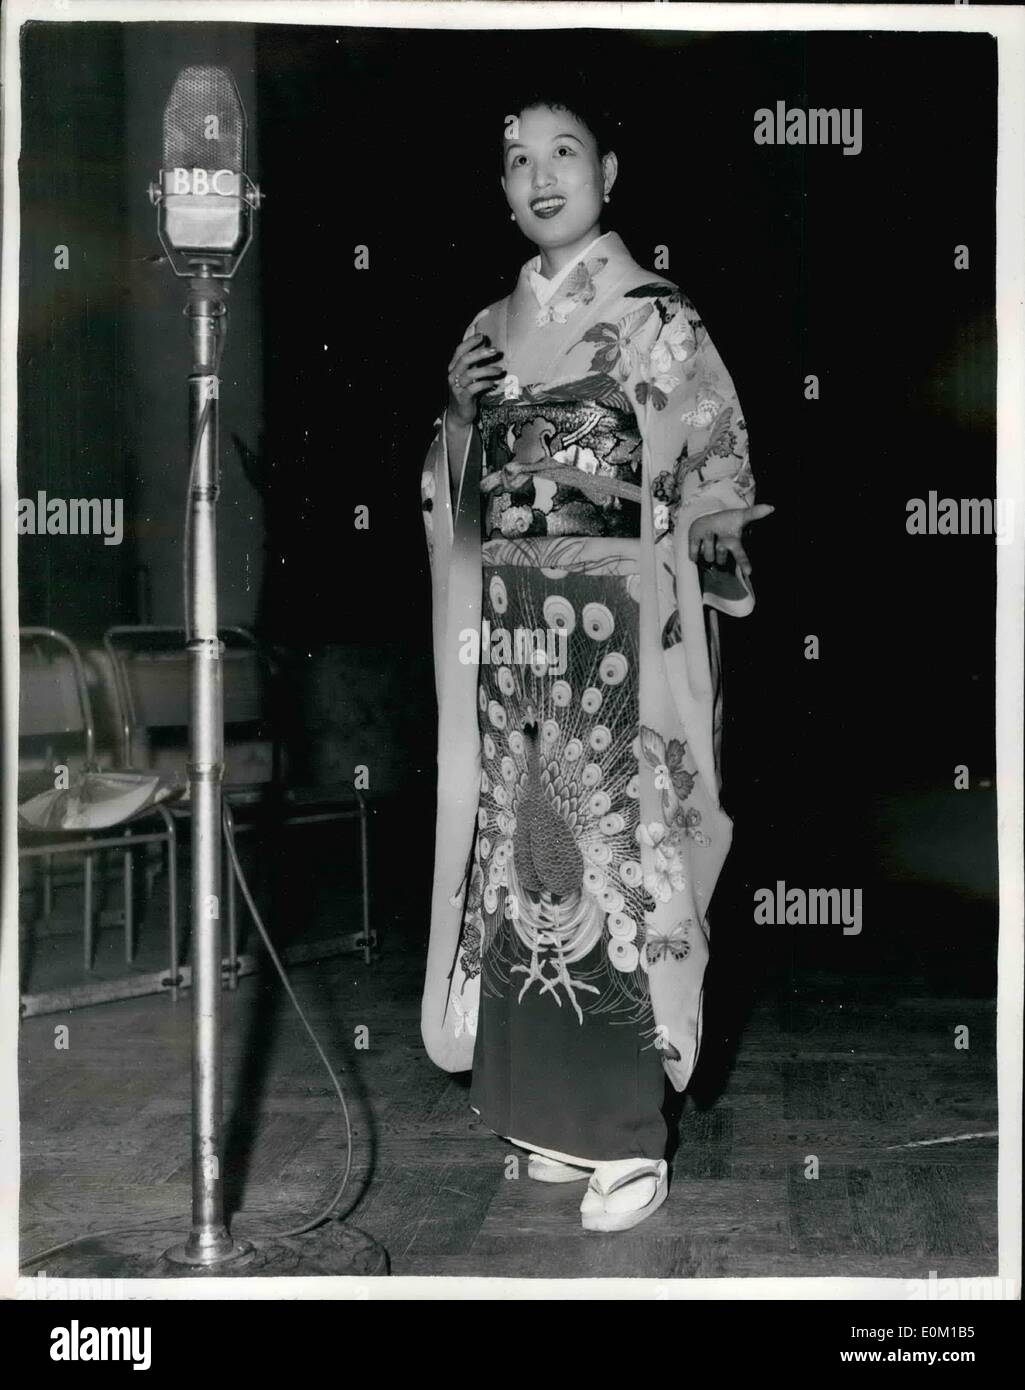 Mar. 03, 1953 - A Japanese Butterfly Makes B.B.C. Recording For Japanese Service: A Madam Butterfly who really is Japanese has arrived in London. She is Michiko Sunahara from Tokio. She has been singing the role of Cho-Cho-San in Madame Butterfly for the past 18 months at the Opera Comique in Paris. Miss Sunsbar, at 28, one of Japan's leading sopranos, sings Madam Butterfly in Japanese and speaks little English. But her French is perfect. This evening she made a B.B.C. recording for the Japanese service. Photo shows Miss Sunahara pictured making her B.B.C. recording this evening. Stock Photo